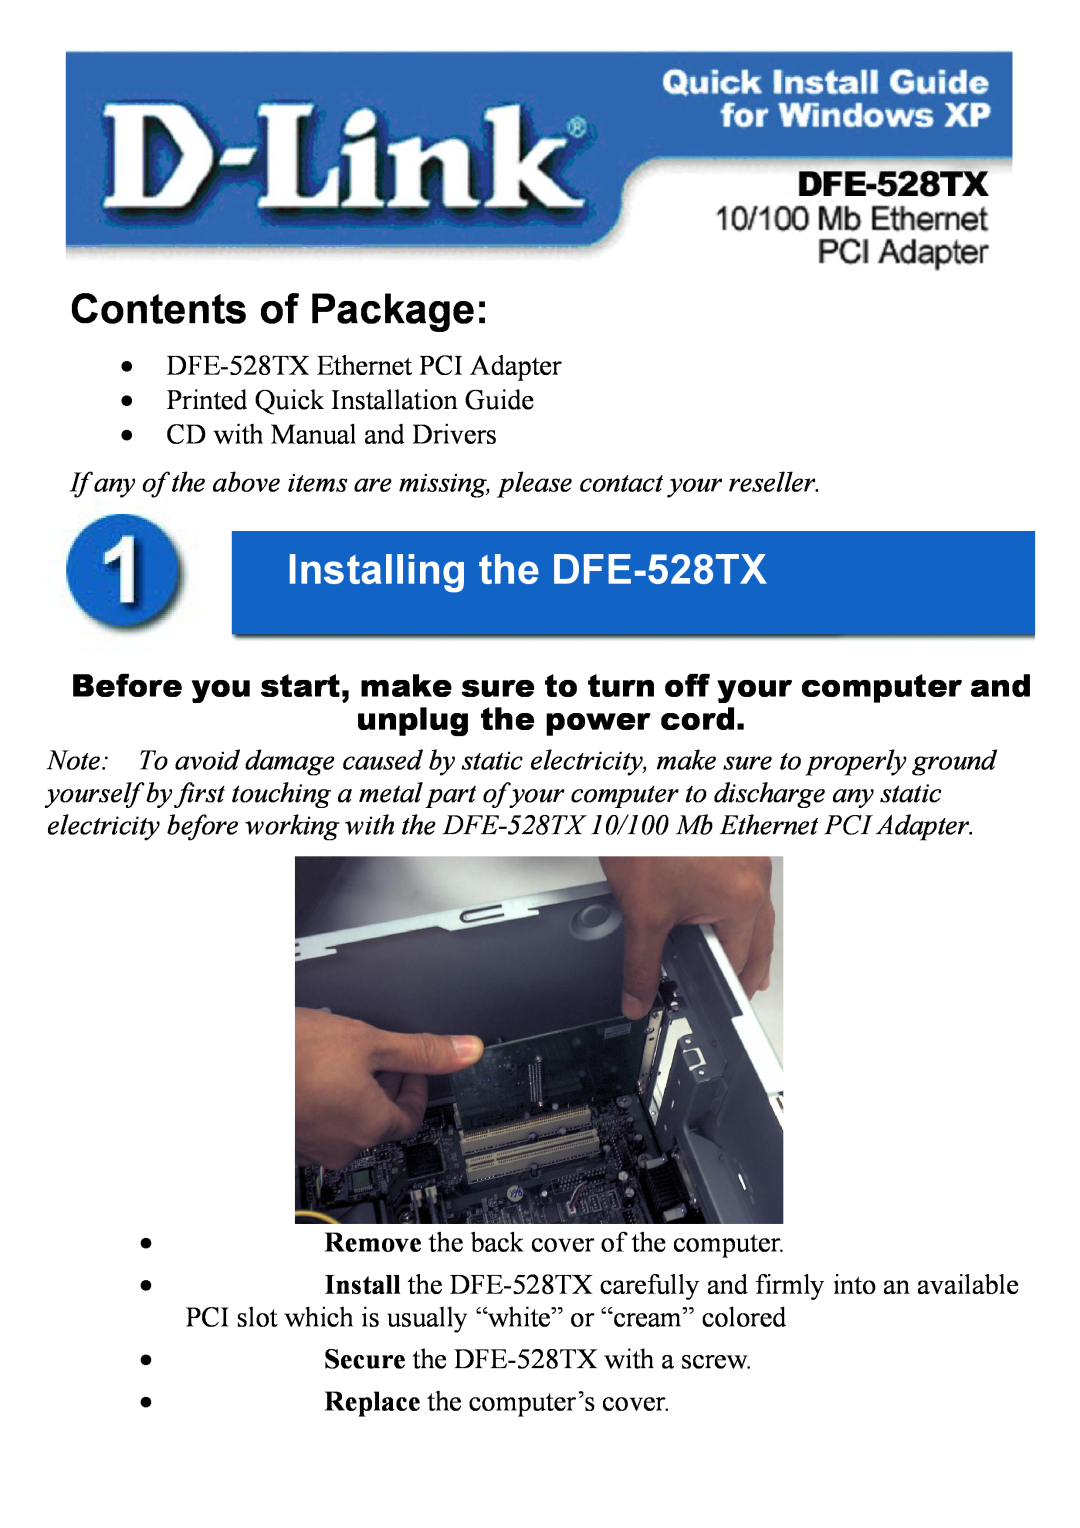 D-Link manual Contents of Package, Installing the DFE-528TX, Before you start, make sure to turn off your computer and 